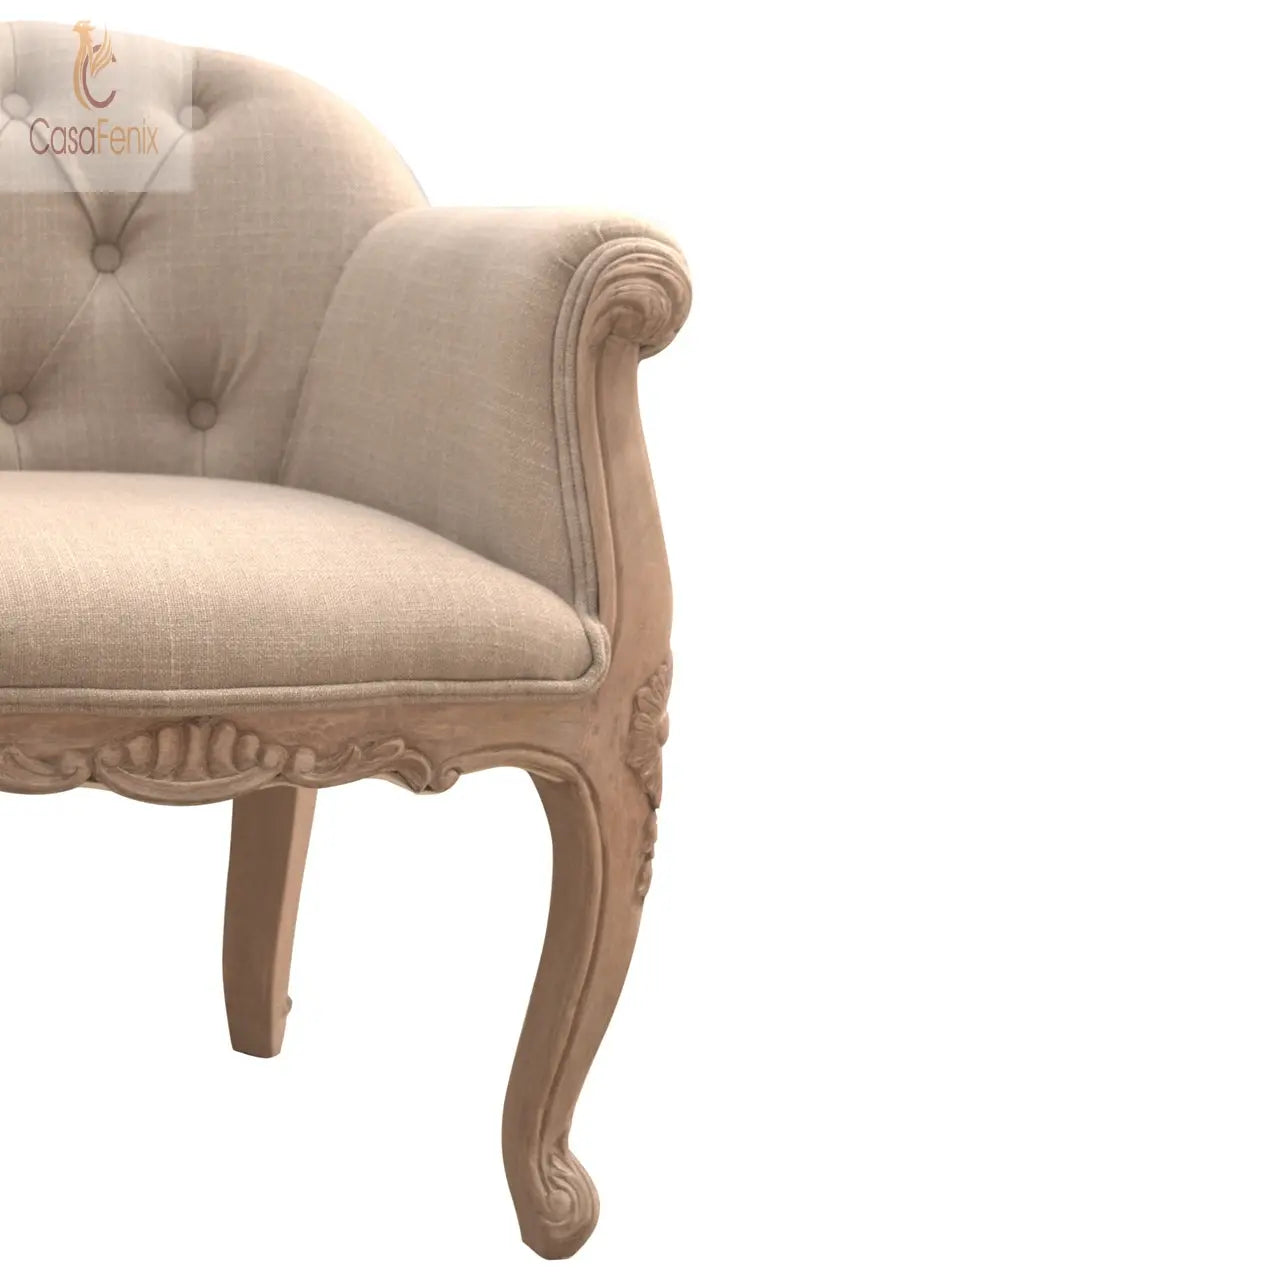 French Style Deep Button Chair 100% solid mango wood and upholstered in mud linen - CasaFenix